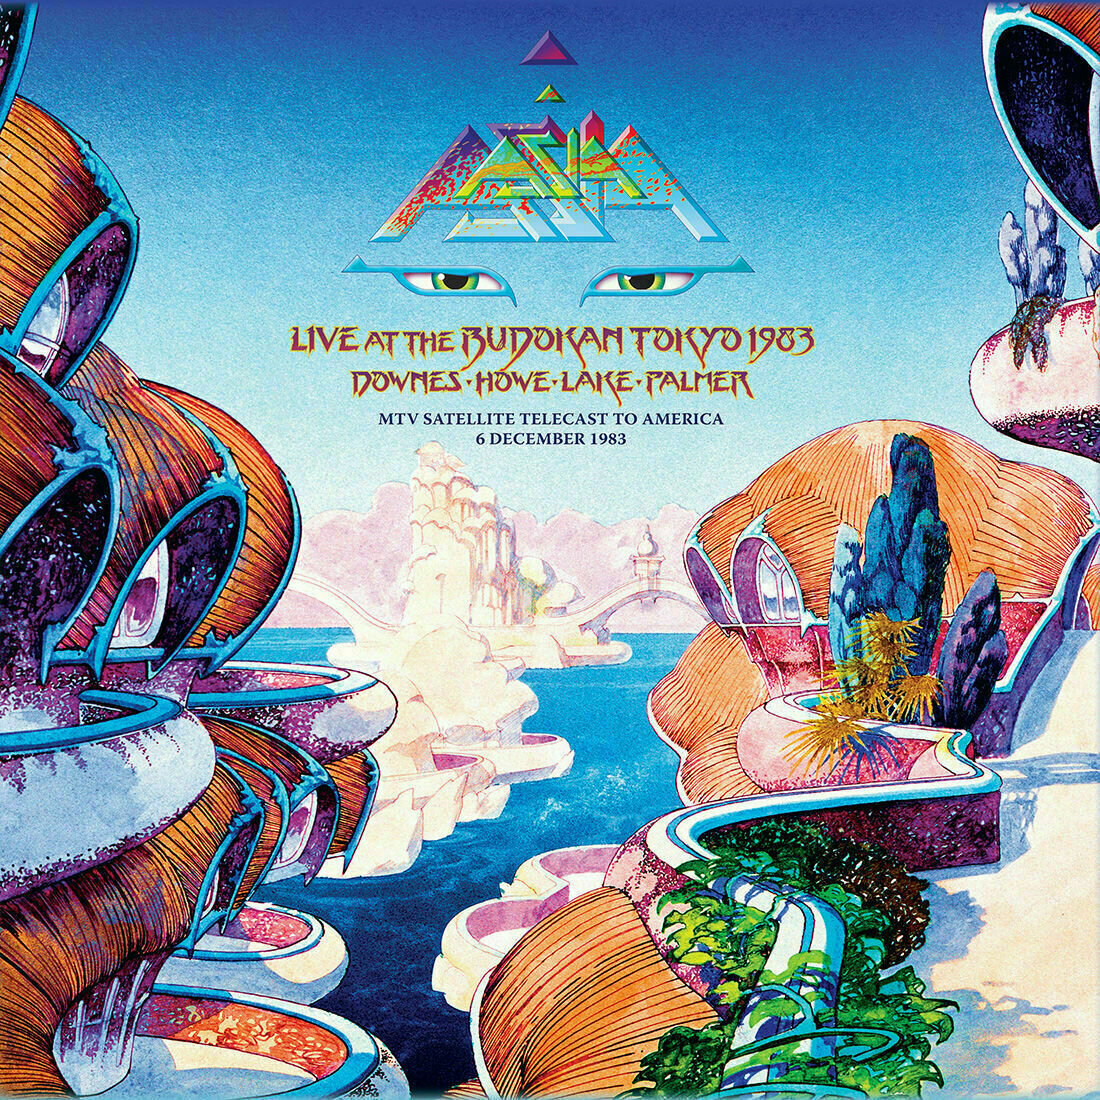 Vinyl Record Asia - Asia In Asia - Live At The Budokan, Tokyo, 1983 (2 LP)